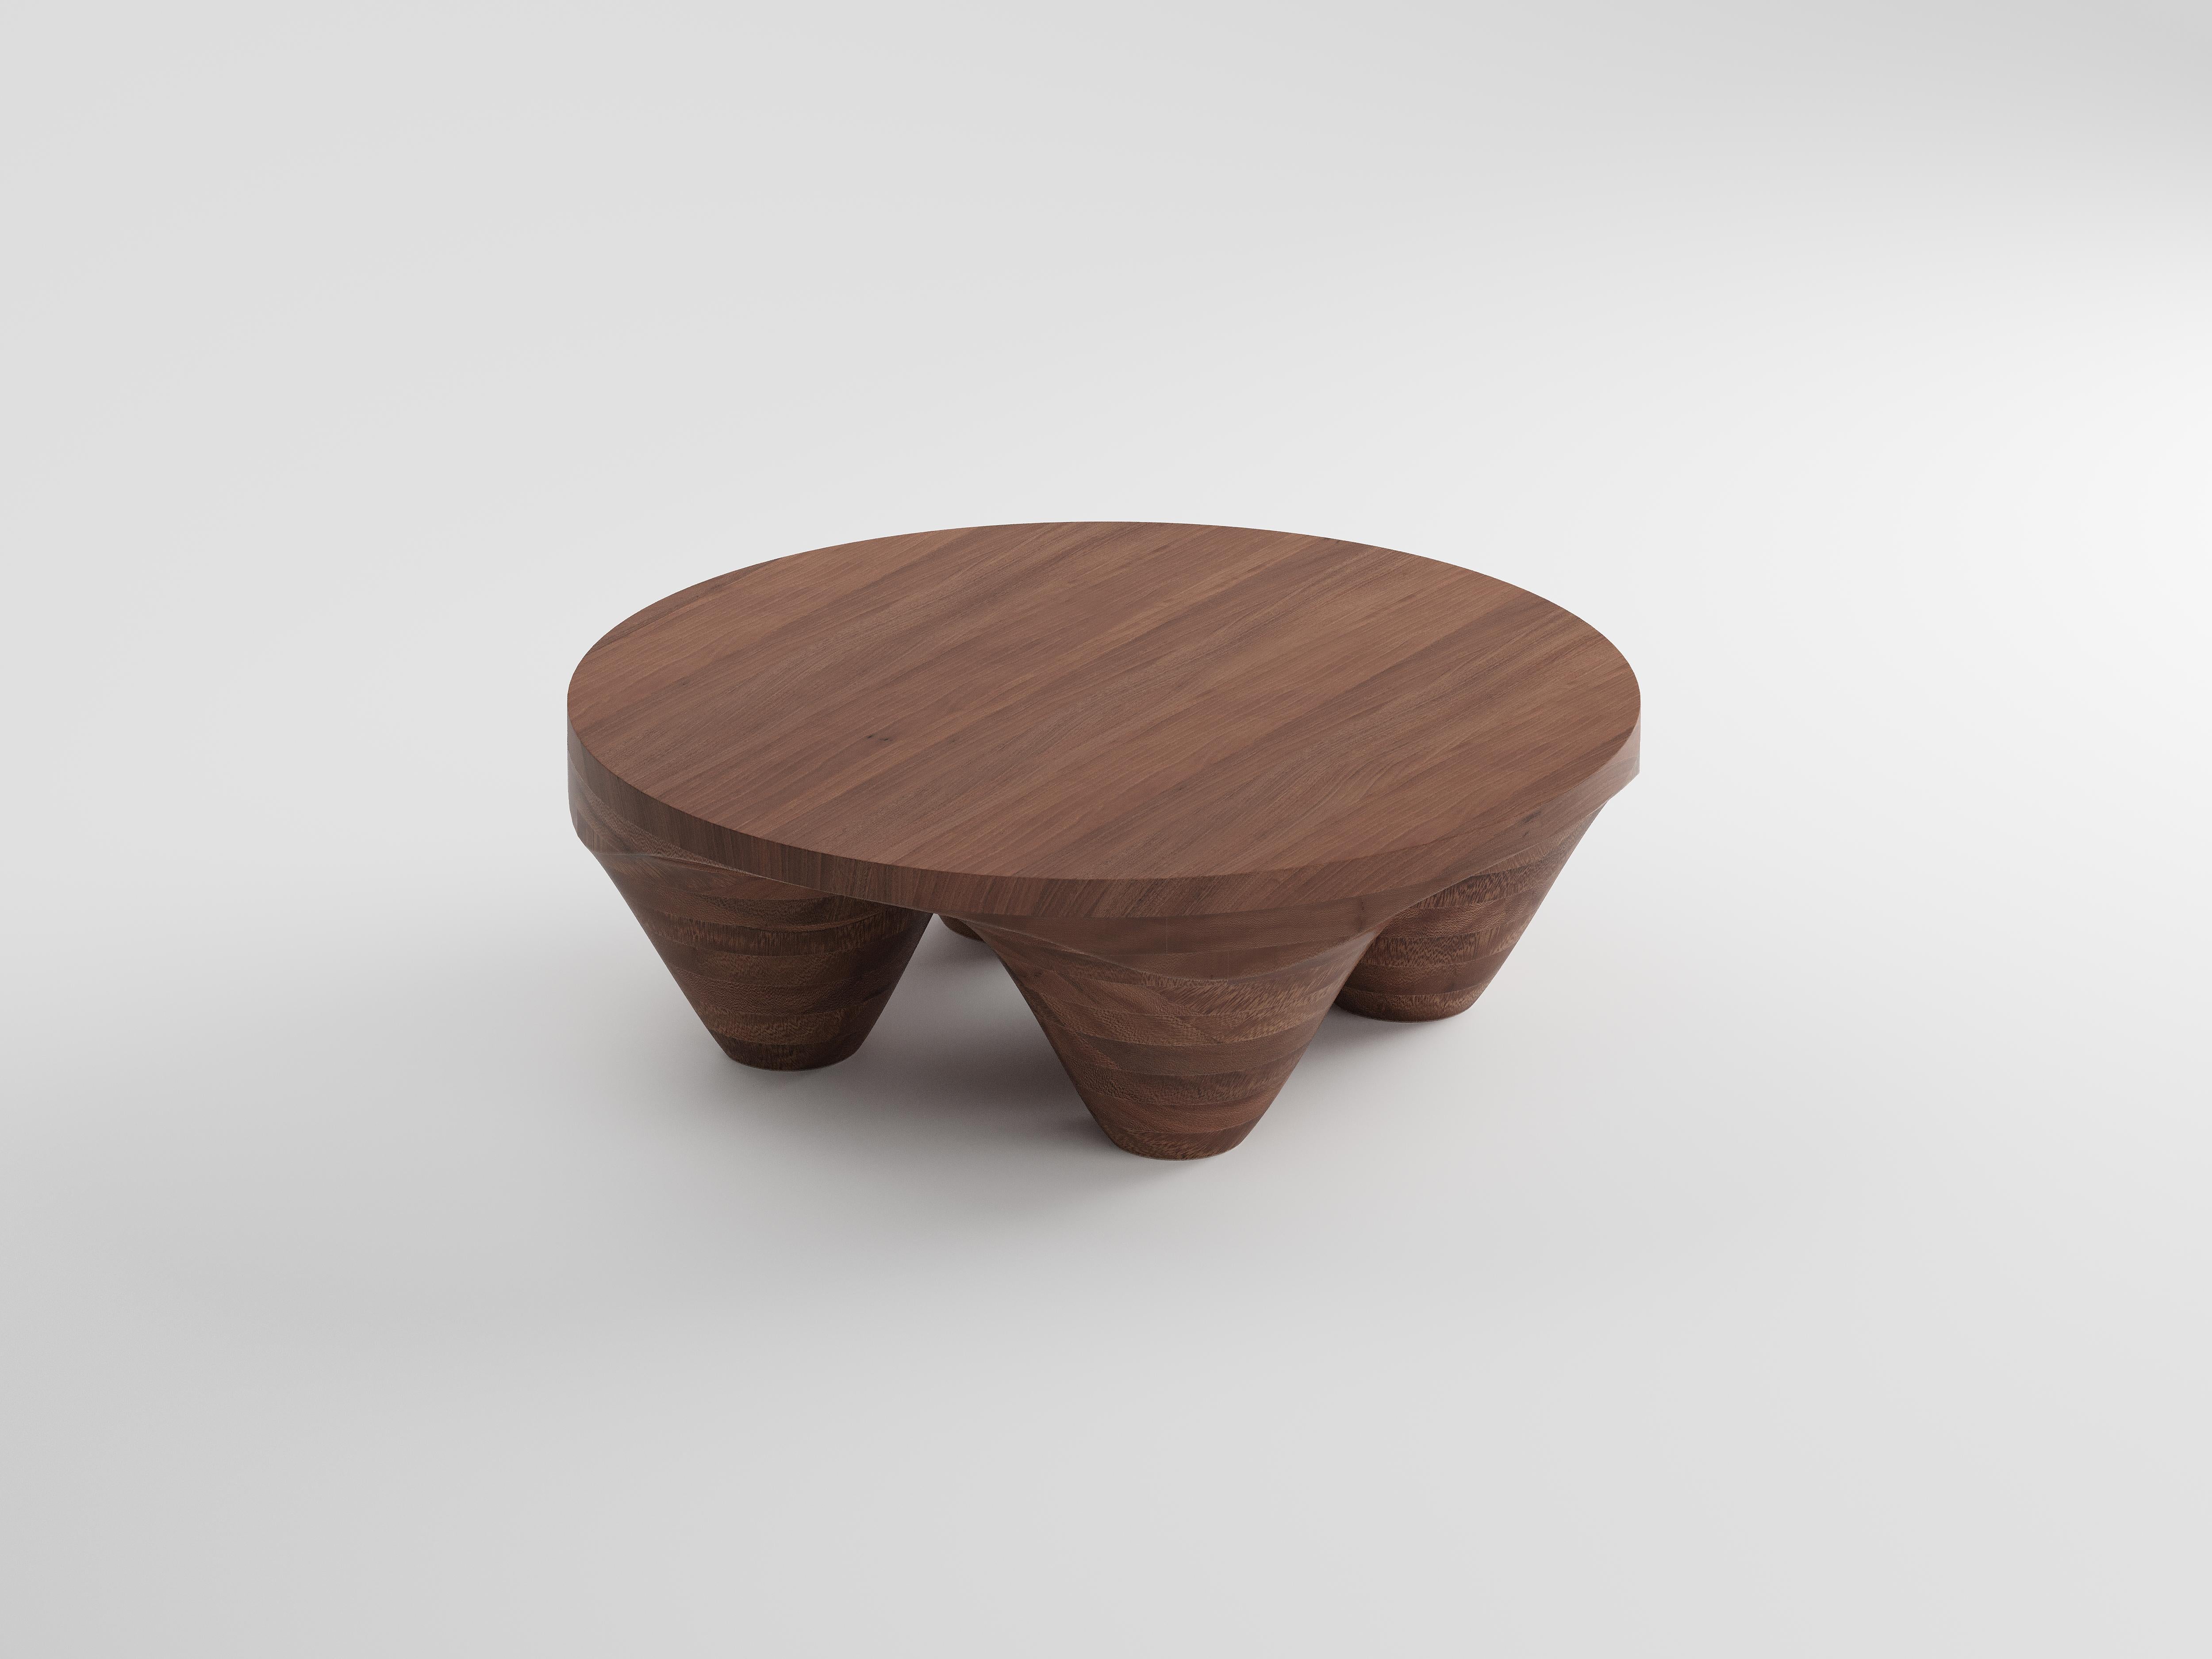 Hand-Crafted Utterö Mahogany Coffee Table by Johan Wilén For Sale